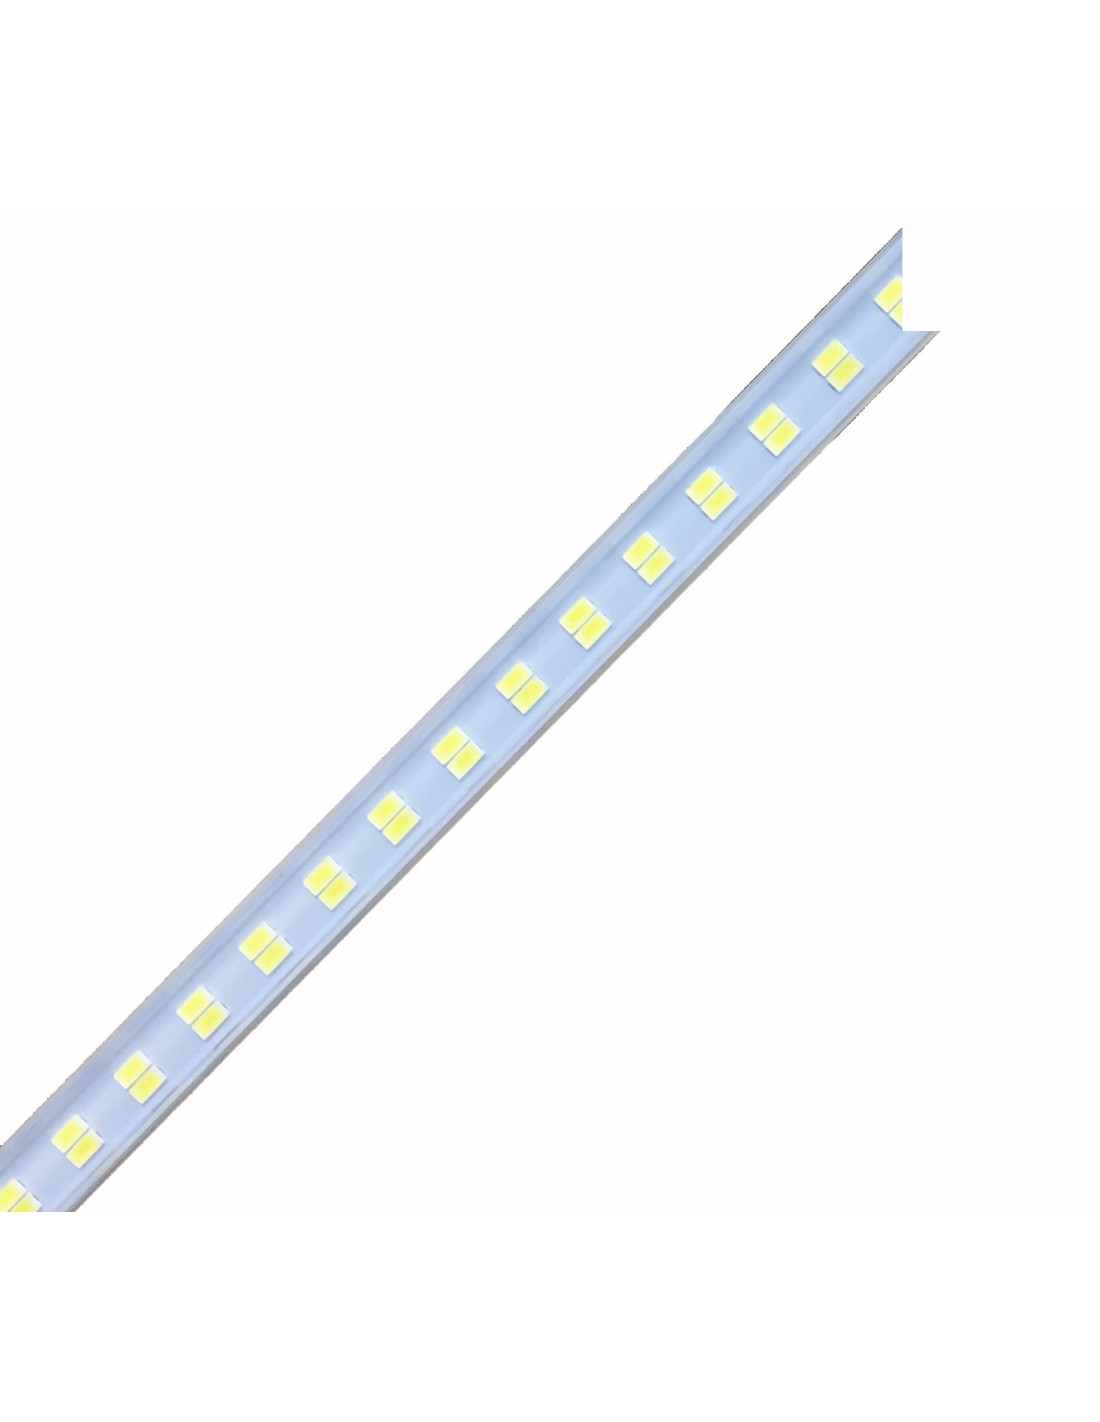 Led lighting -For mod. FESTIVAL-10 - available only with plexiglass service plan